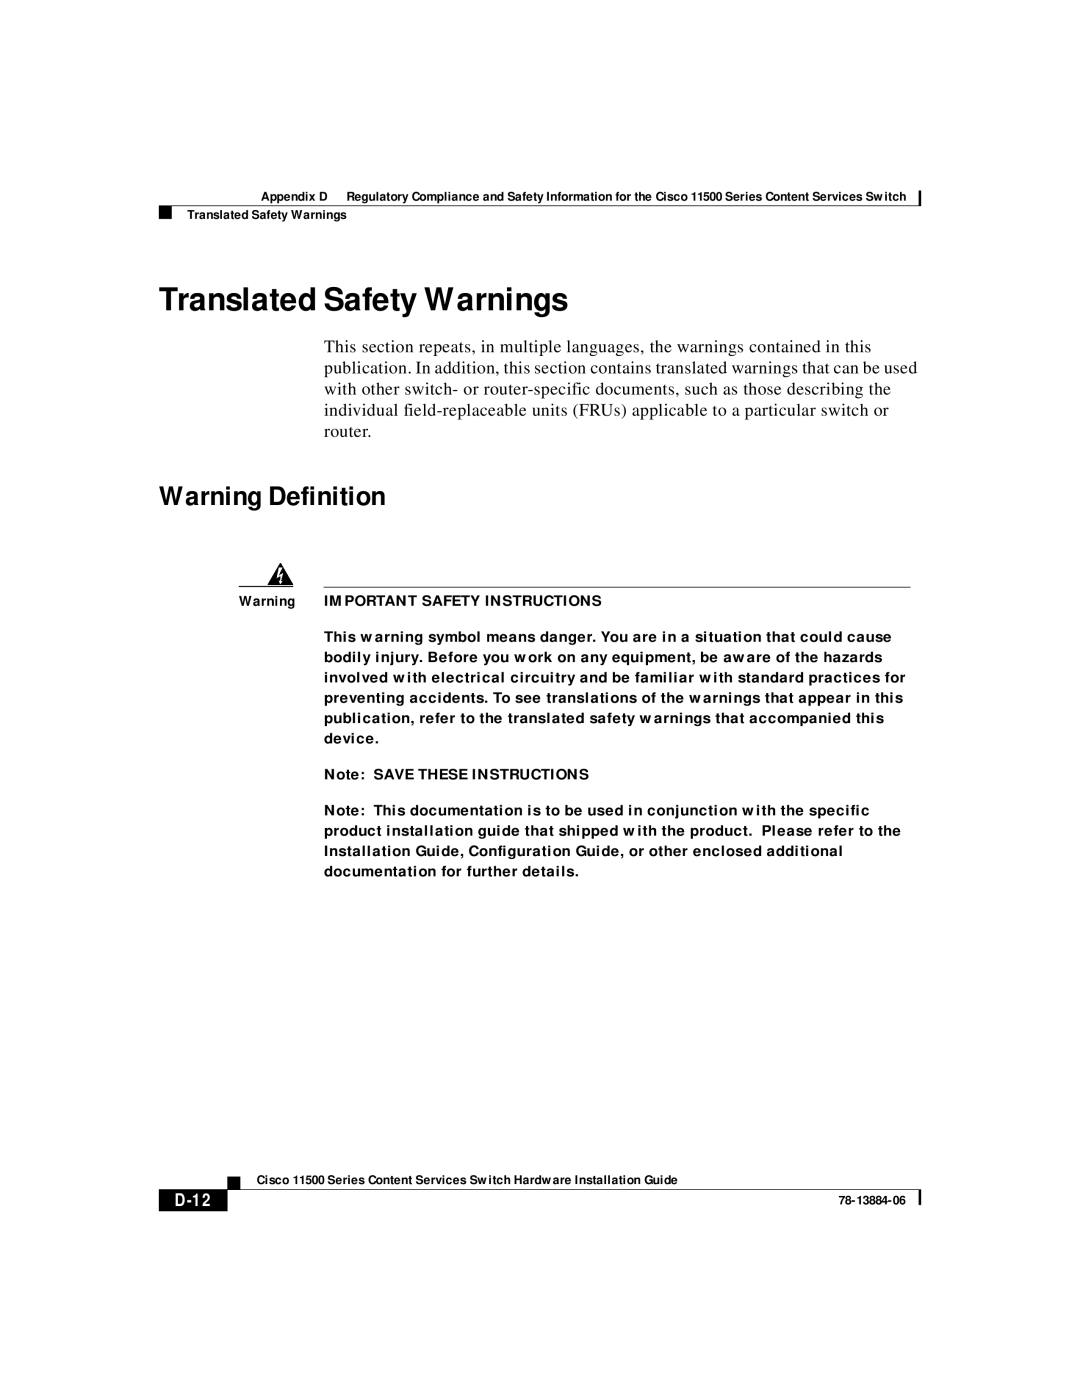 Cisco Systems 11506, 11503, 11501, 11500 appendix Translated Safety Warnings, Warning Definition, D-12 